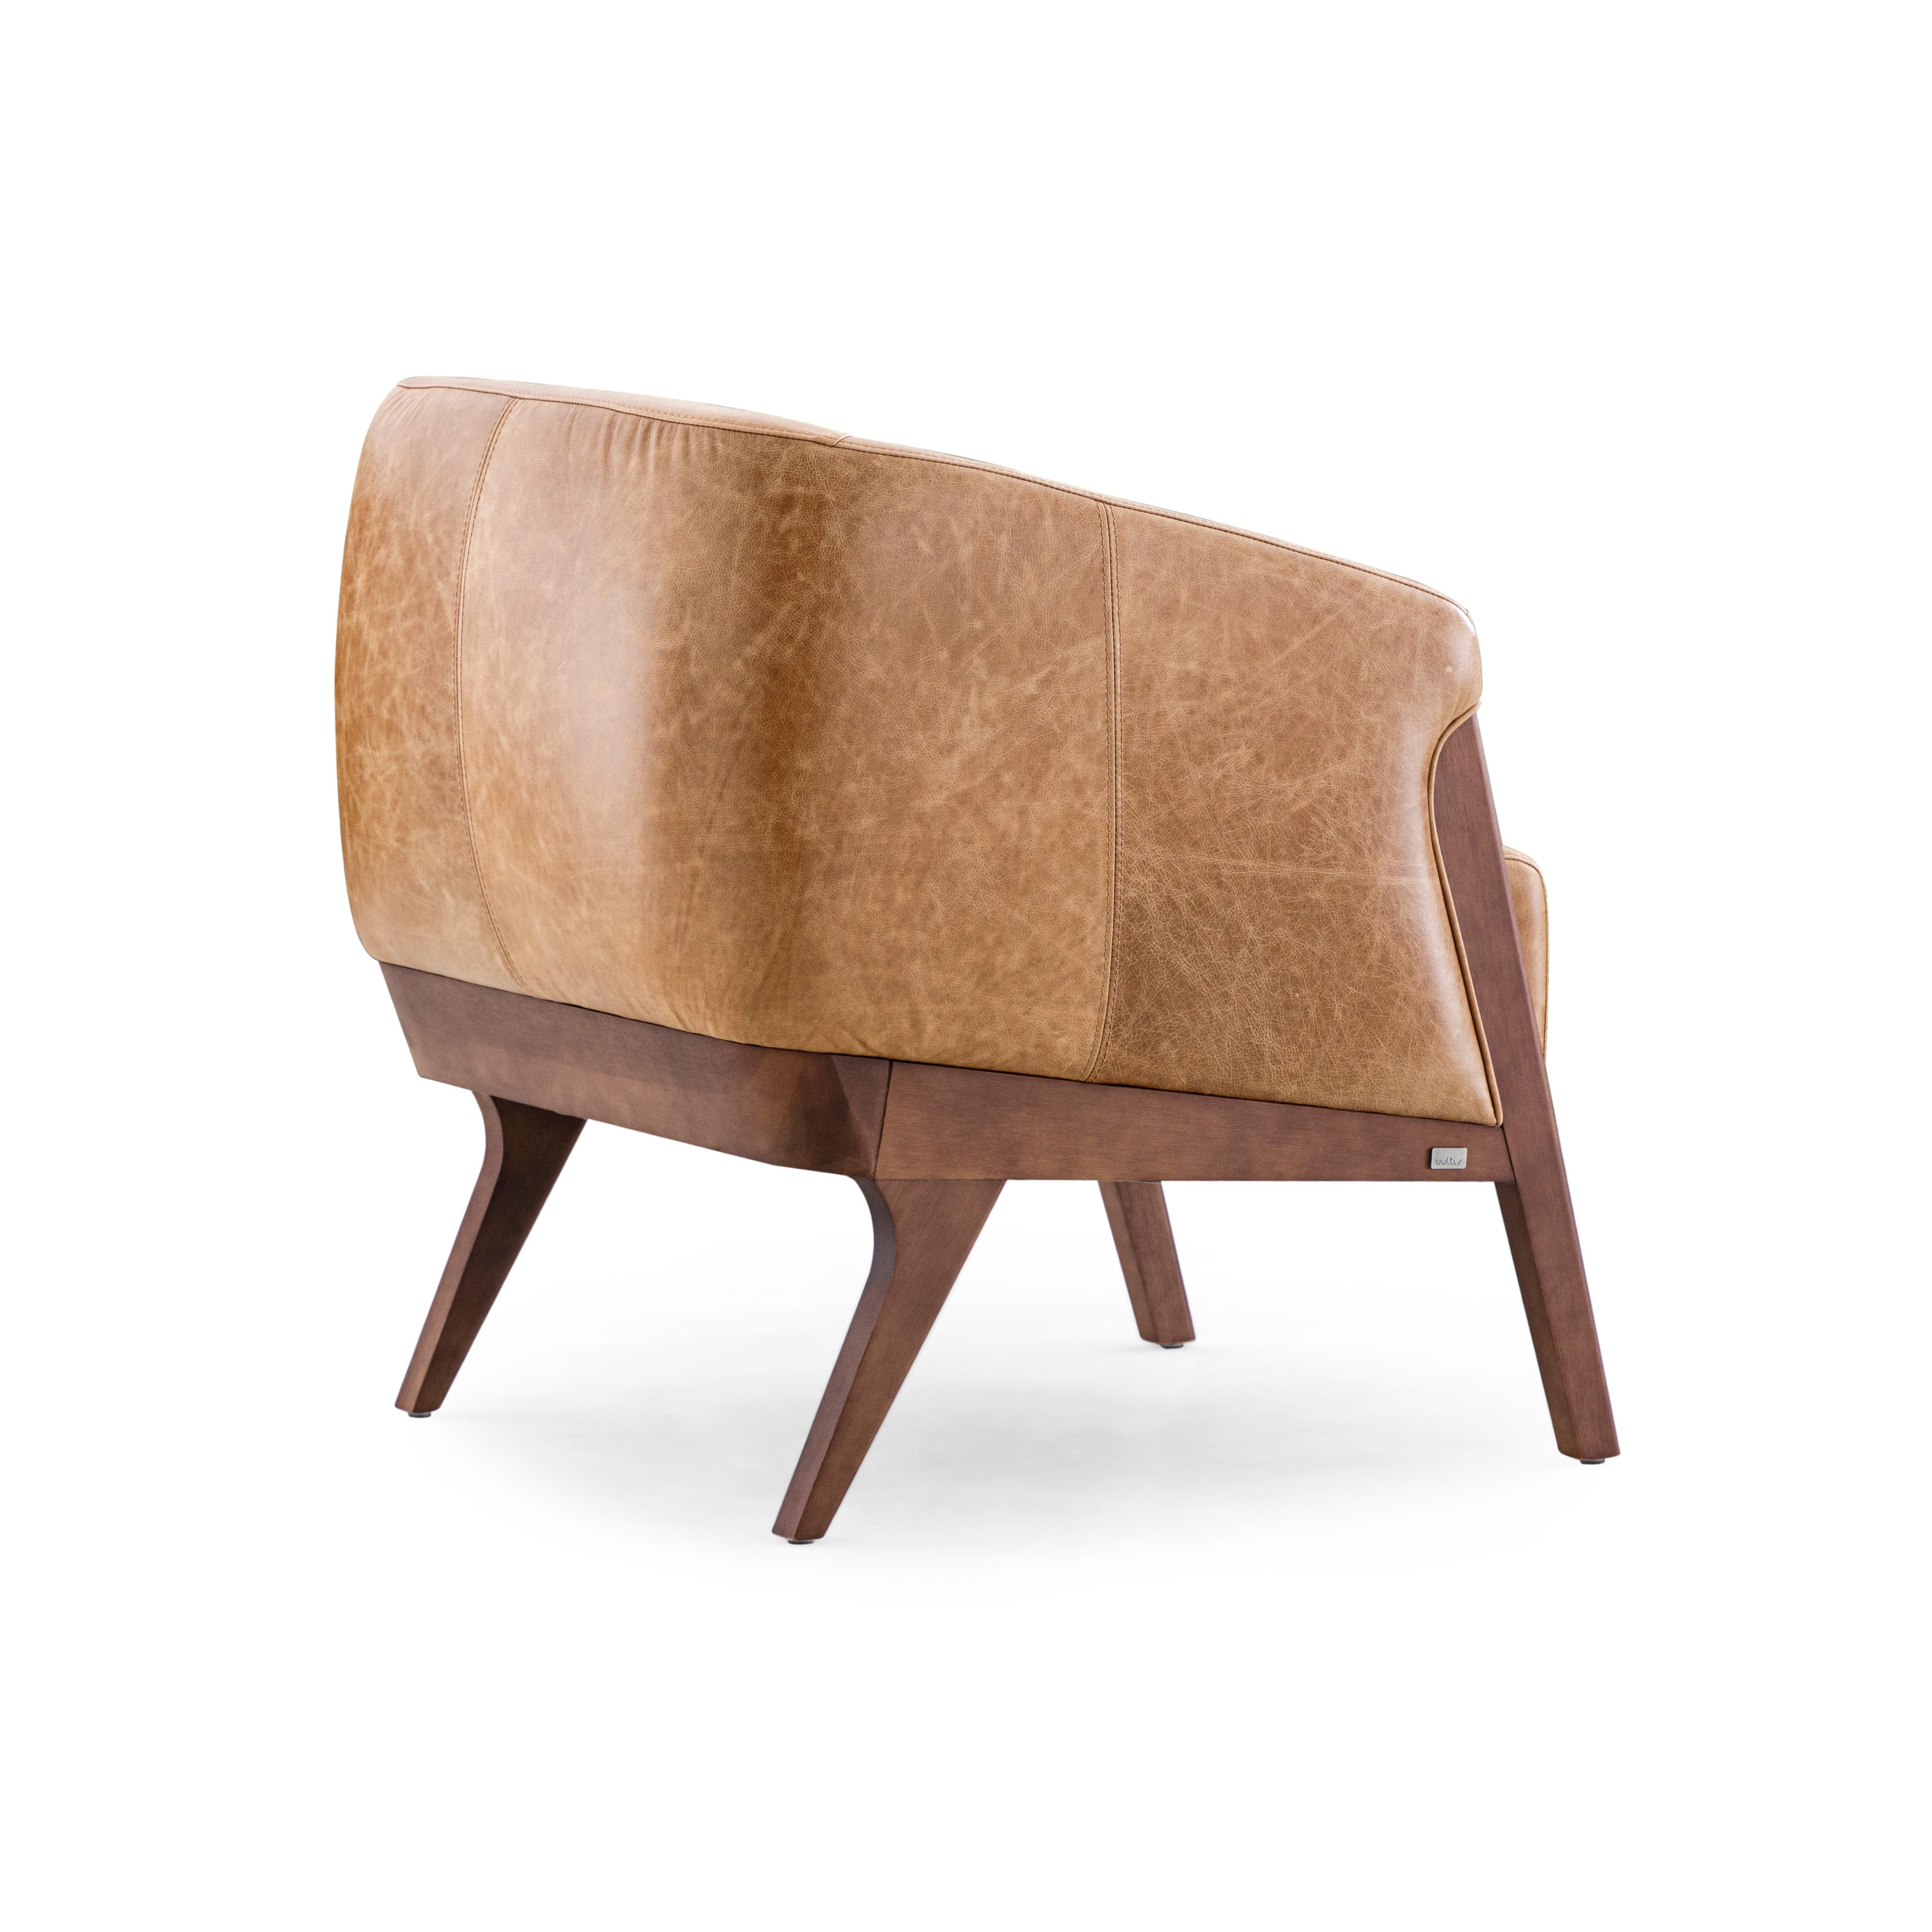 Brazilian Abra Armchair in Brown Leather and Walnut Wood Finish For Sale